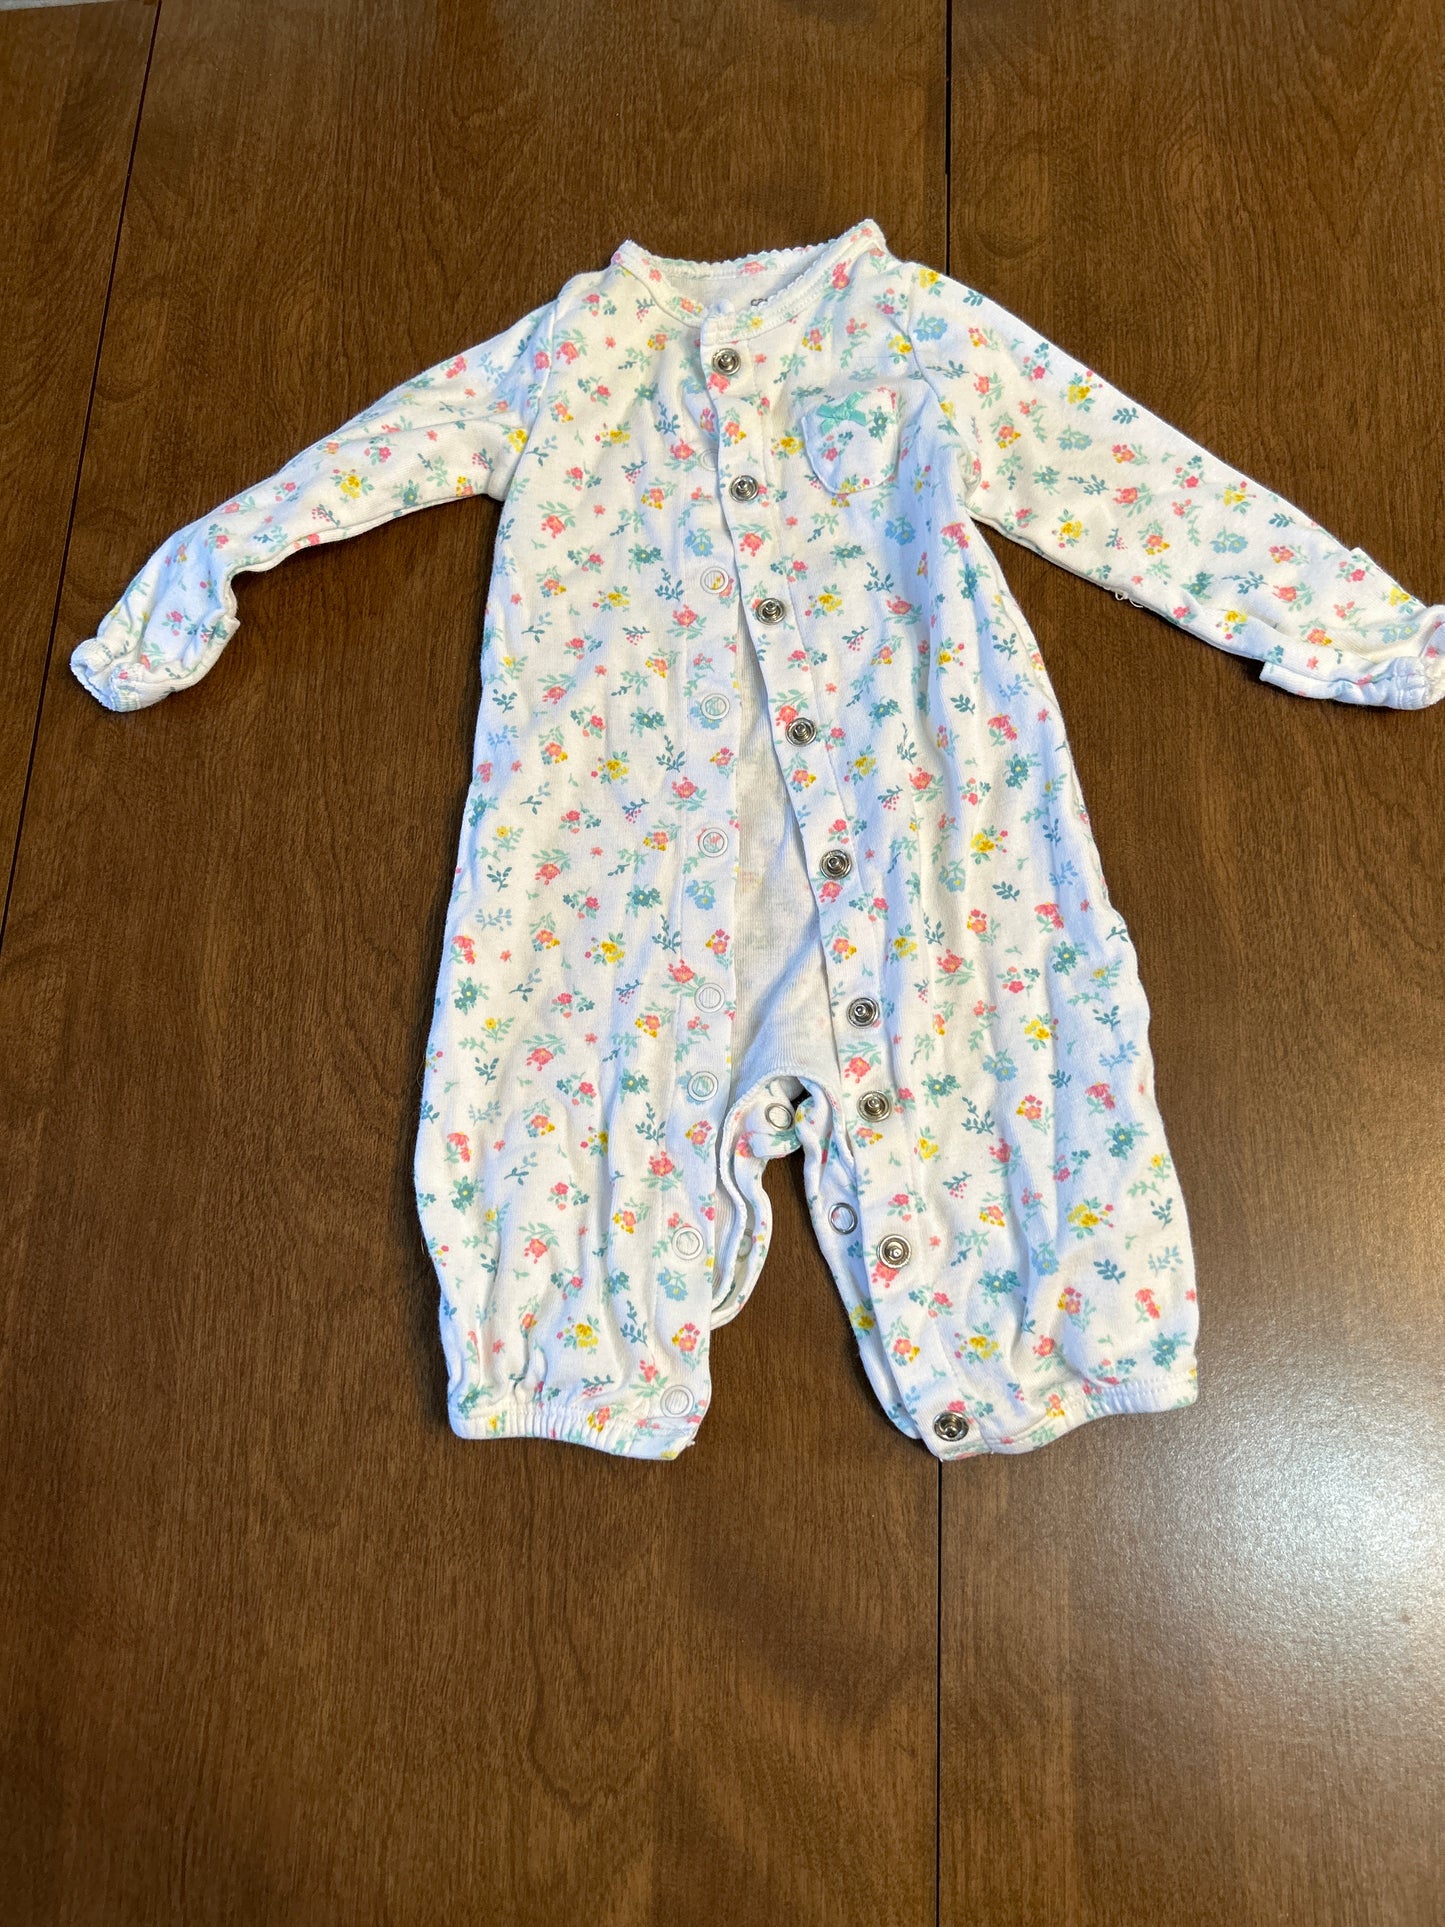 3-6 month girl outfits